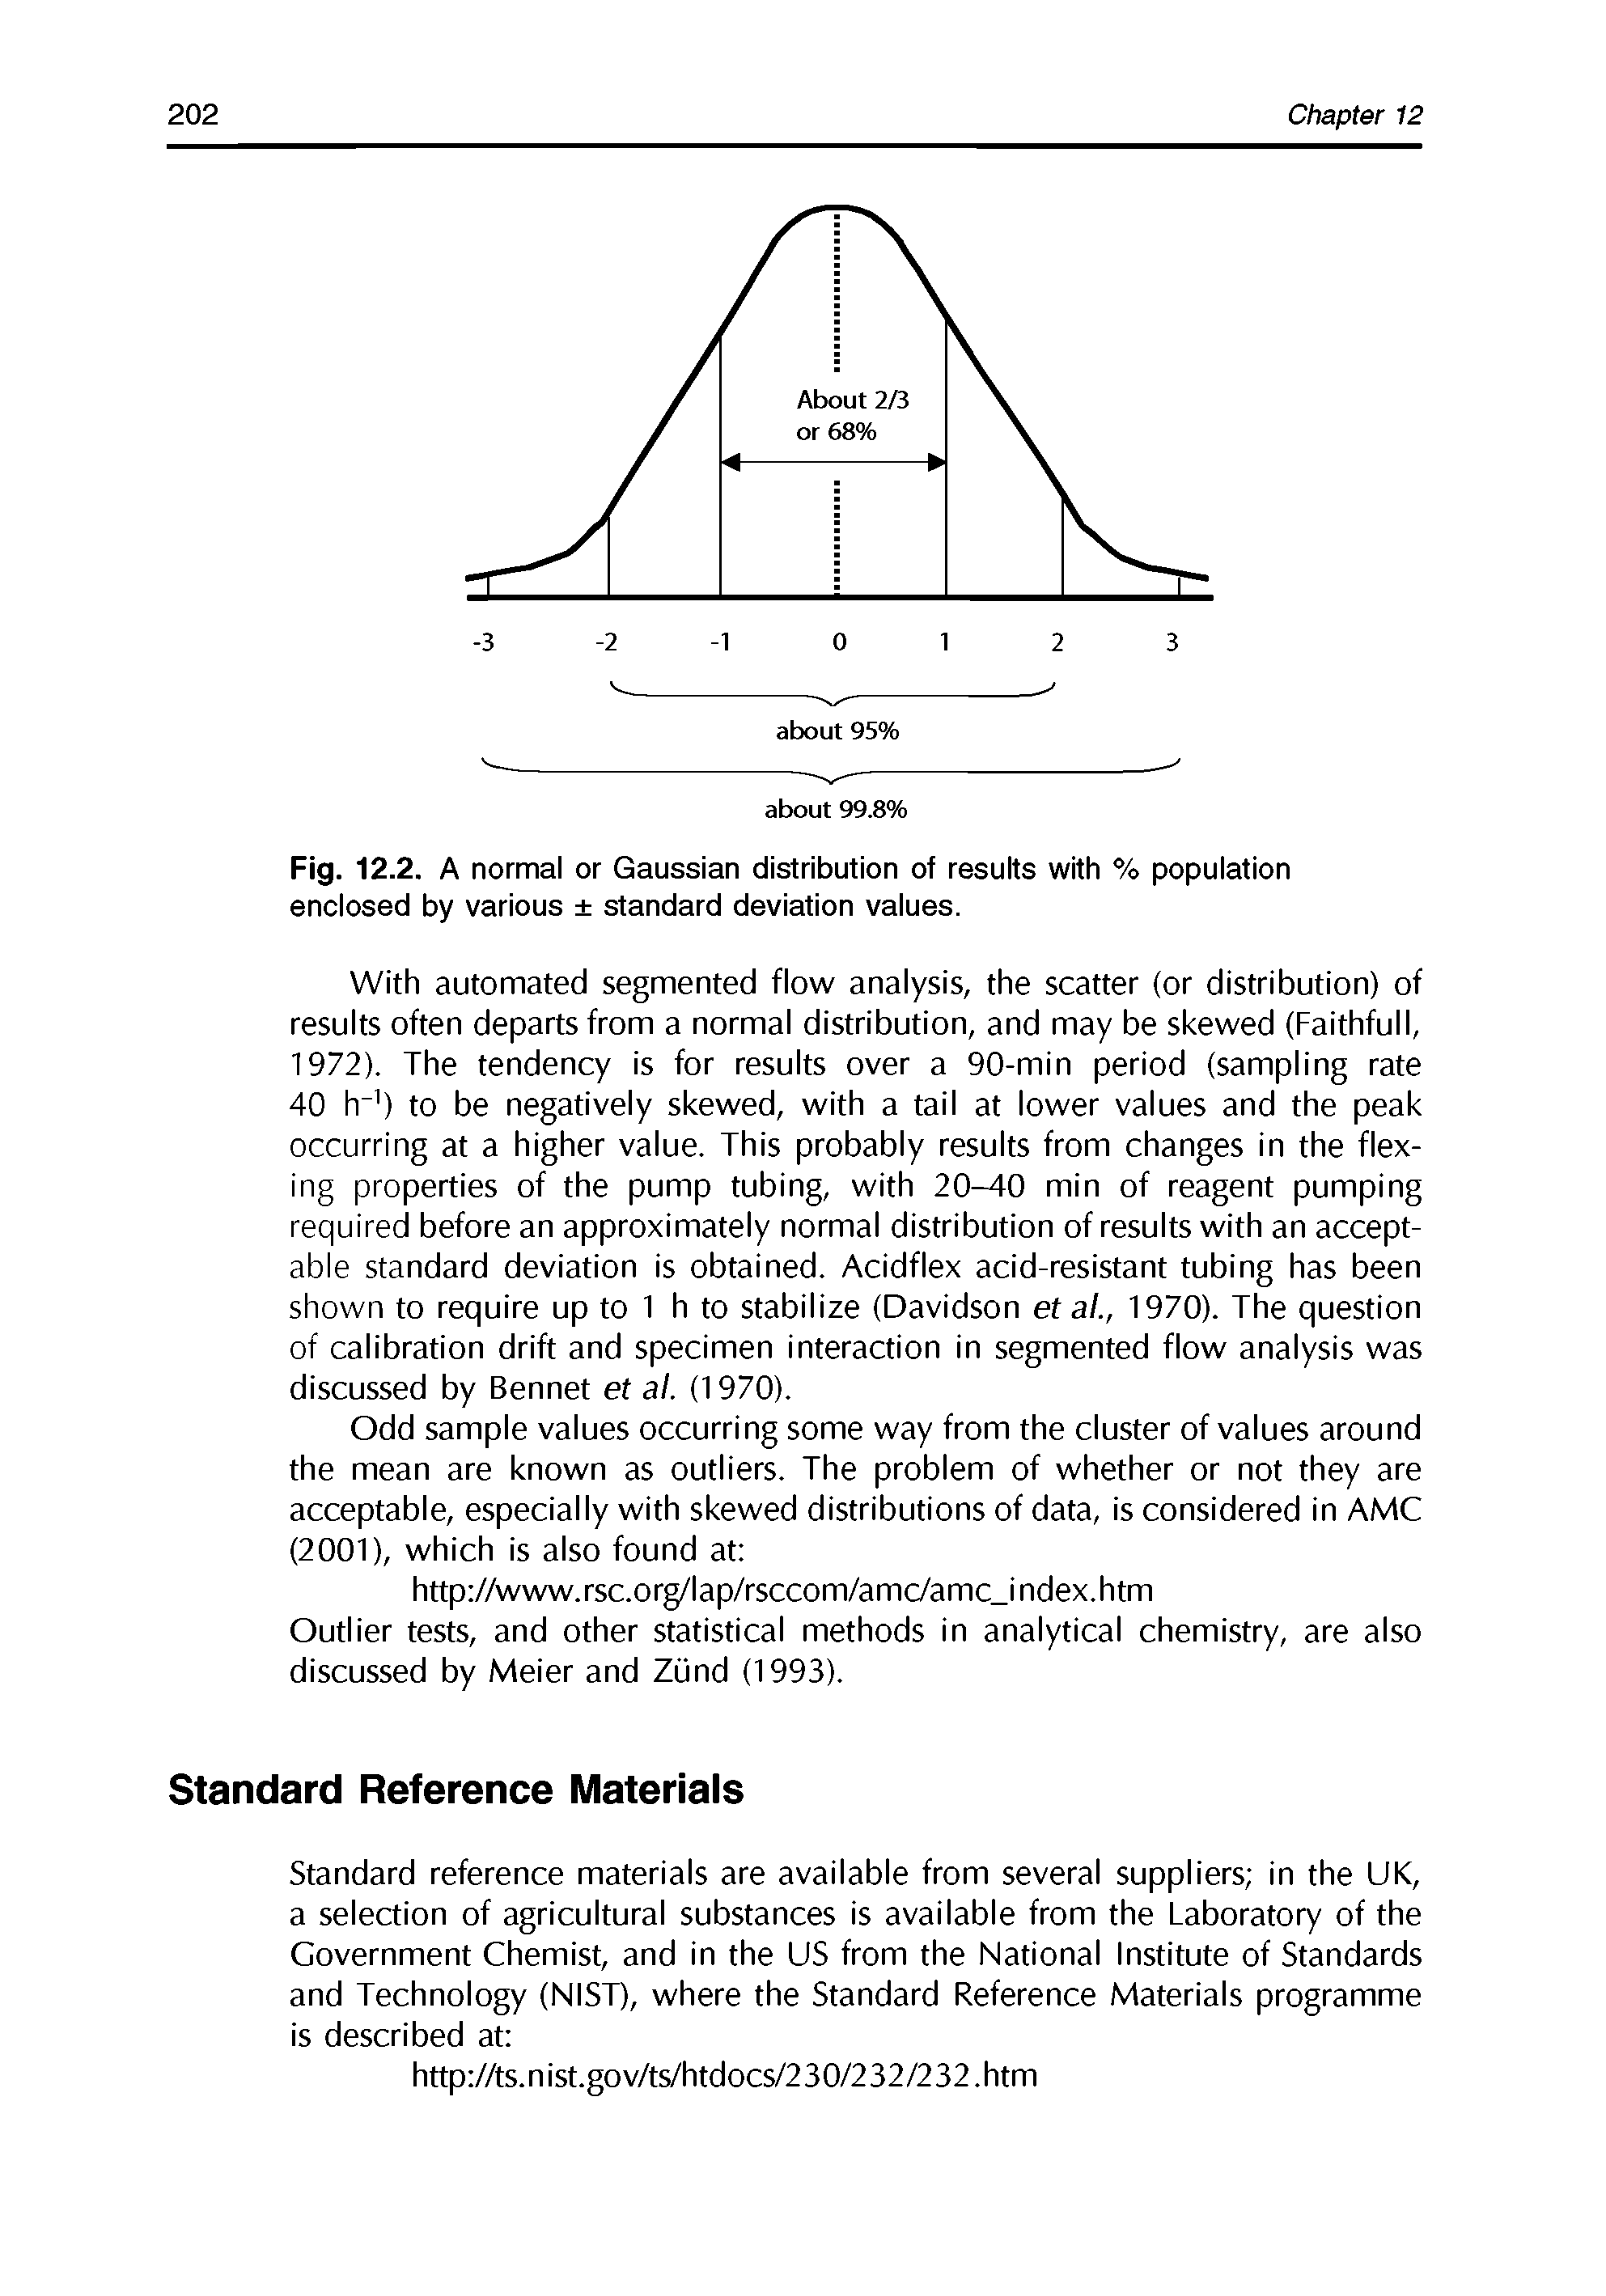 Fig. 12.2. A normal or Gaussian distribution of results with % population enclosed by various standard deviation values.